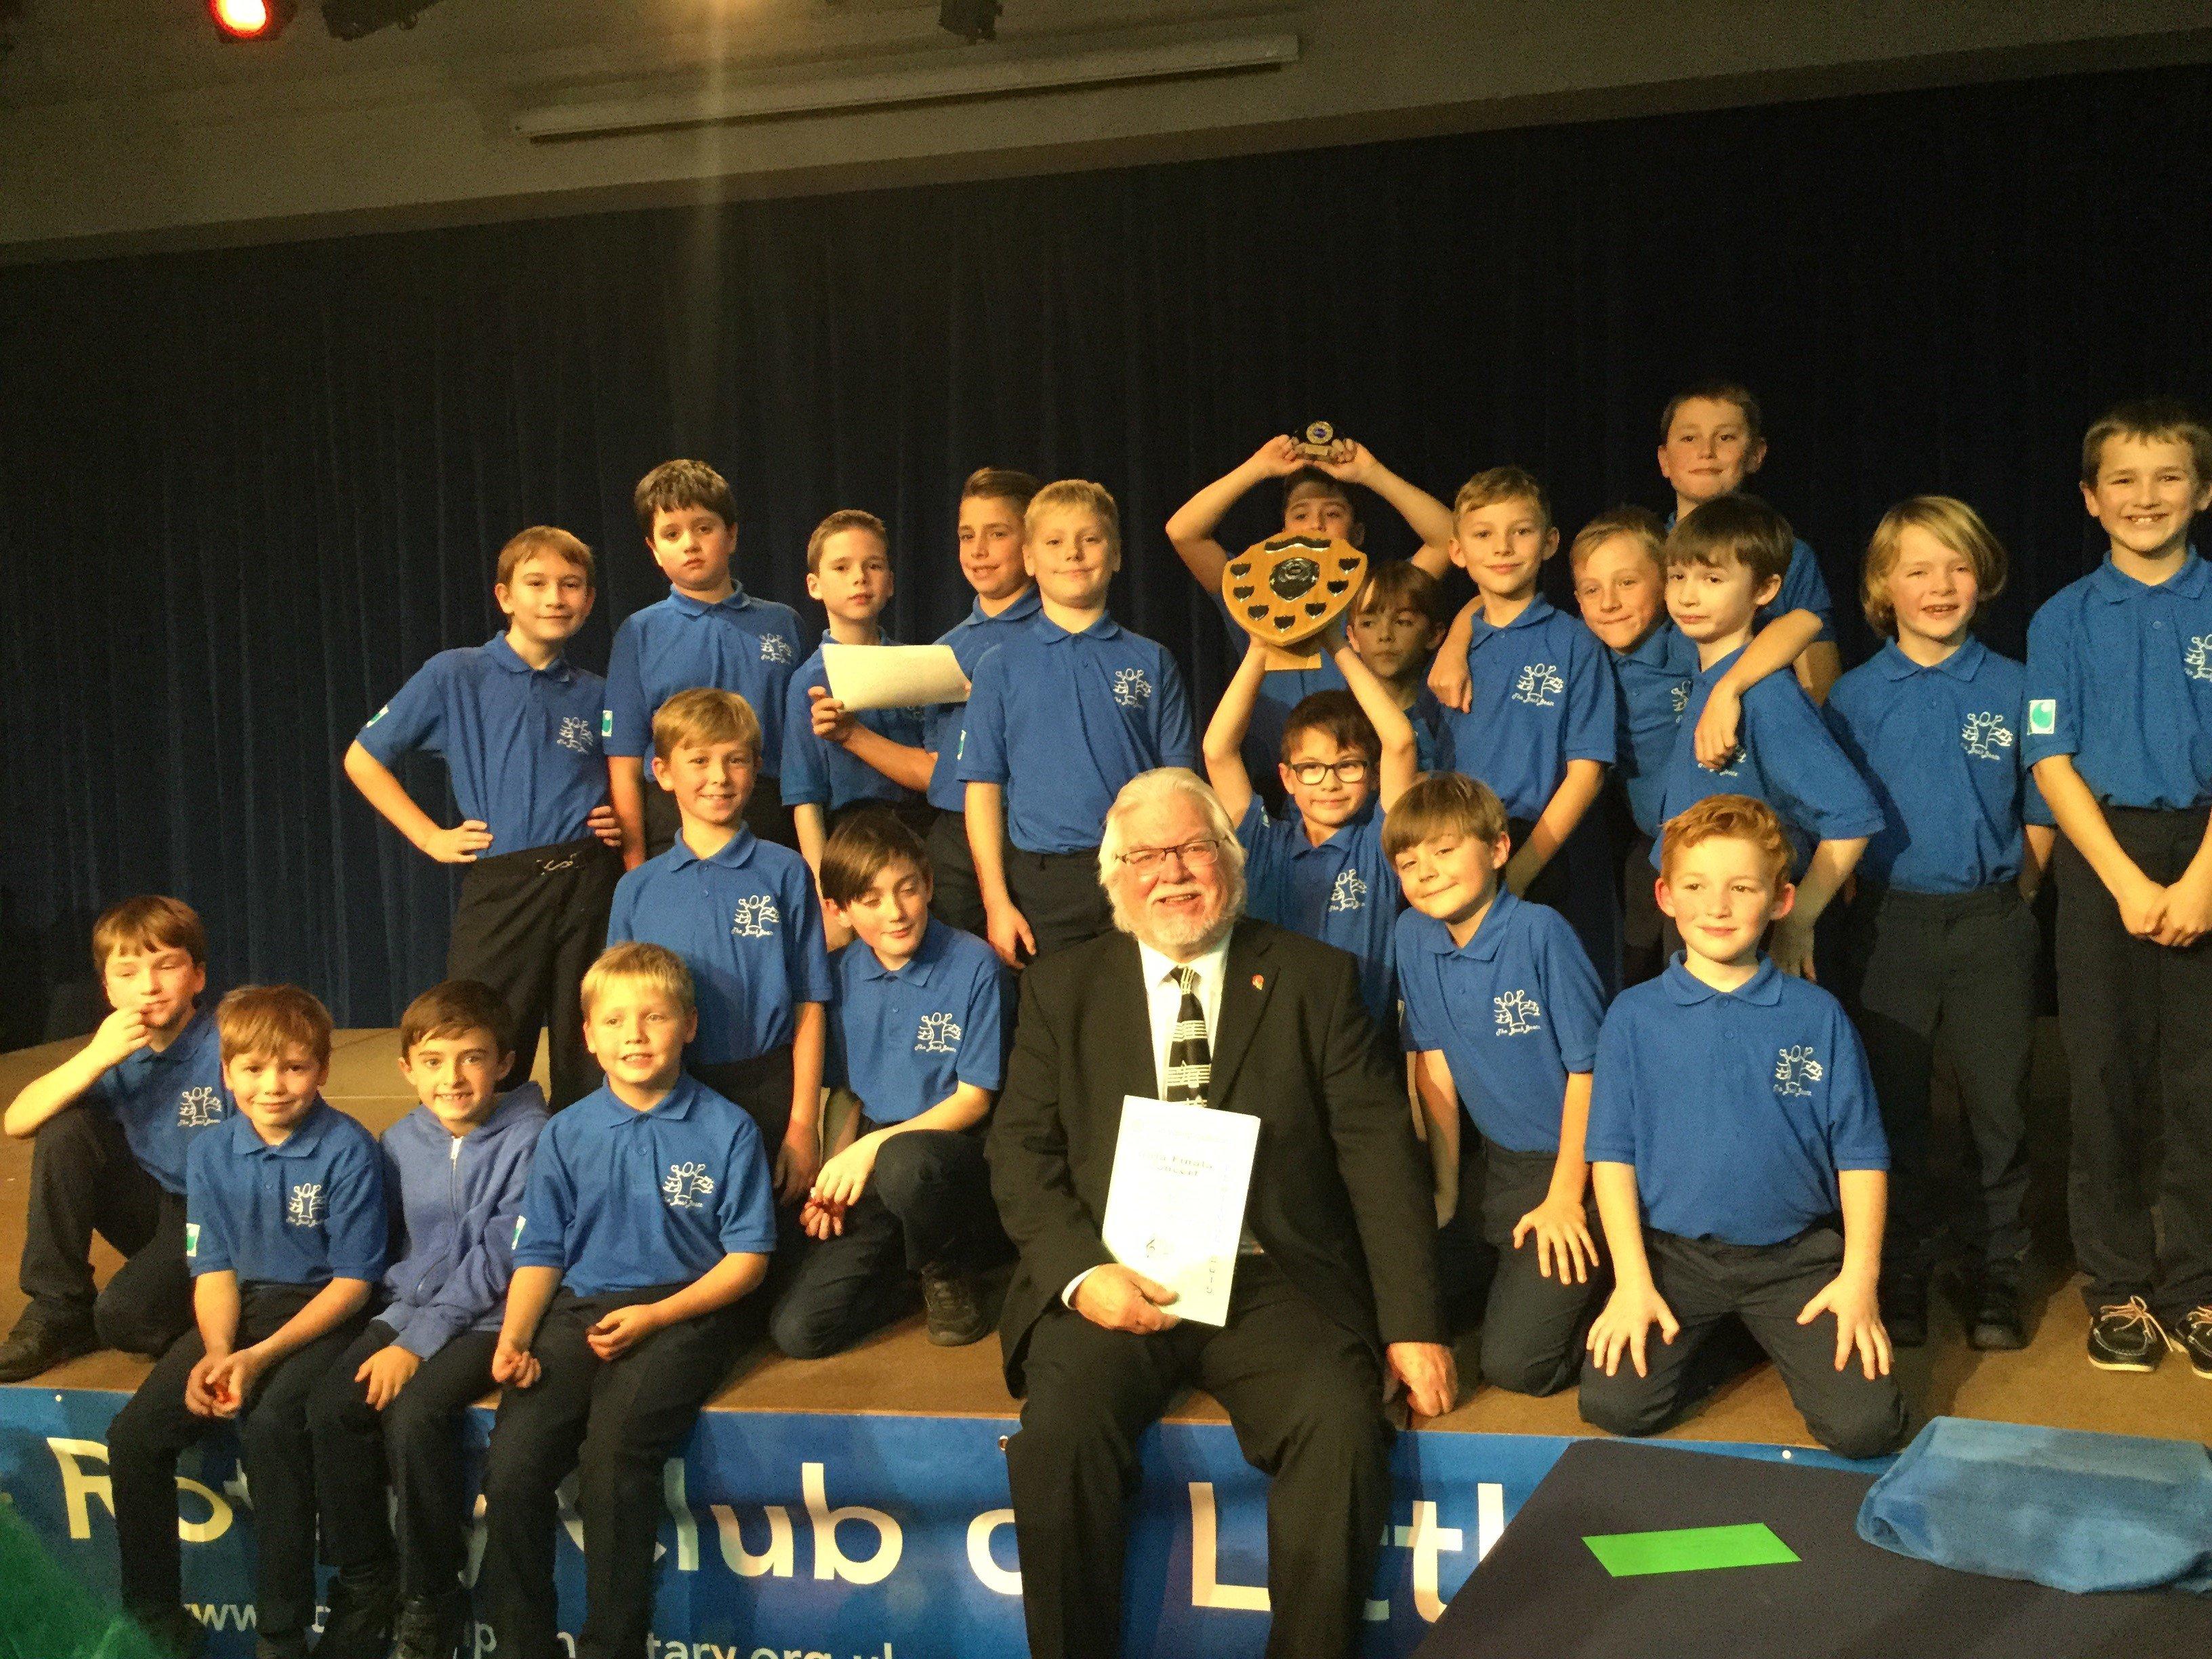 Boys vocal group The BackBeatz, from Upper Beeding Primary School, was named Choir of the Year at the Arun Young Musicians Festival 2019